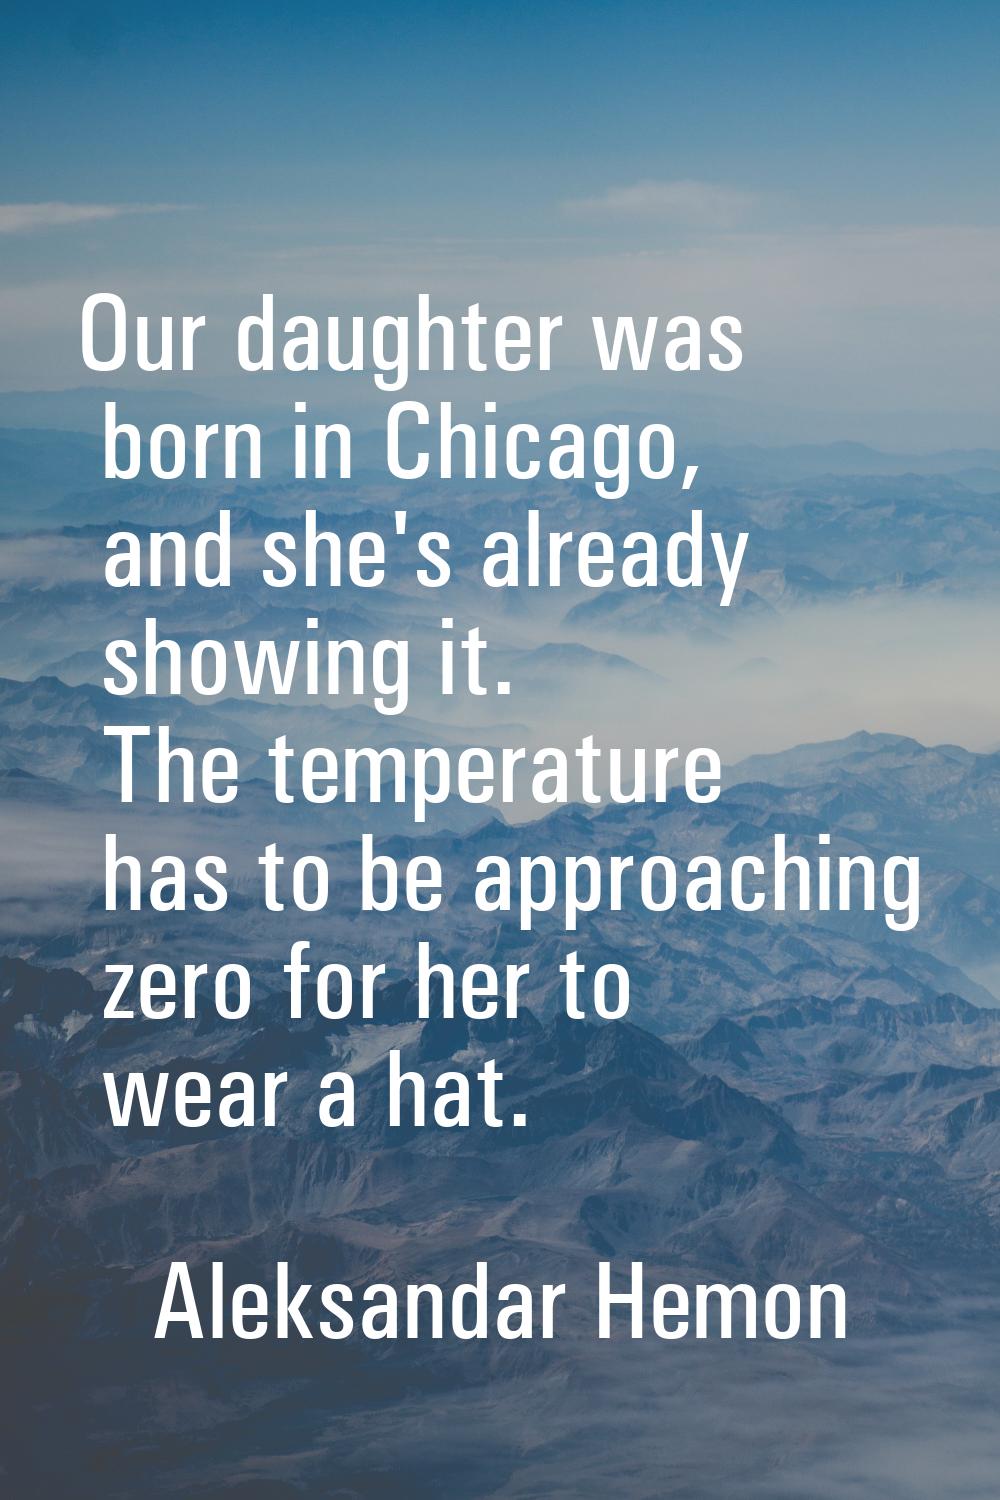 Our daughter was born in Chicago, and she's already showing it. The temperature has to be approachi